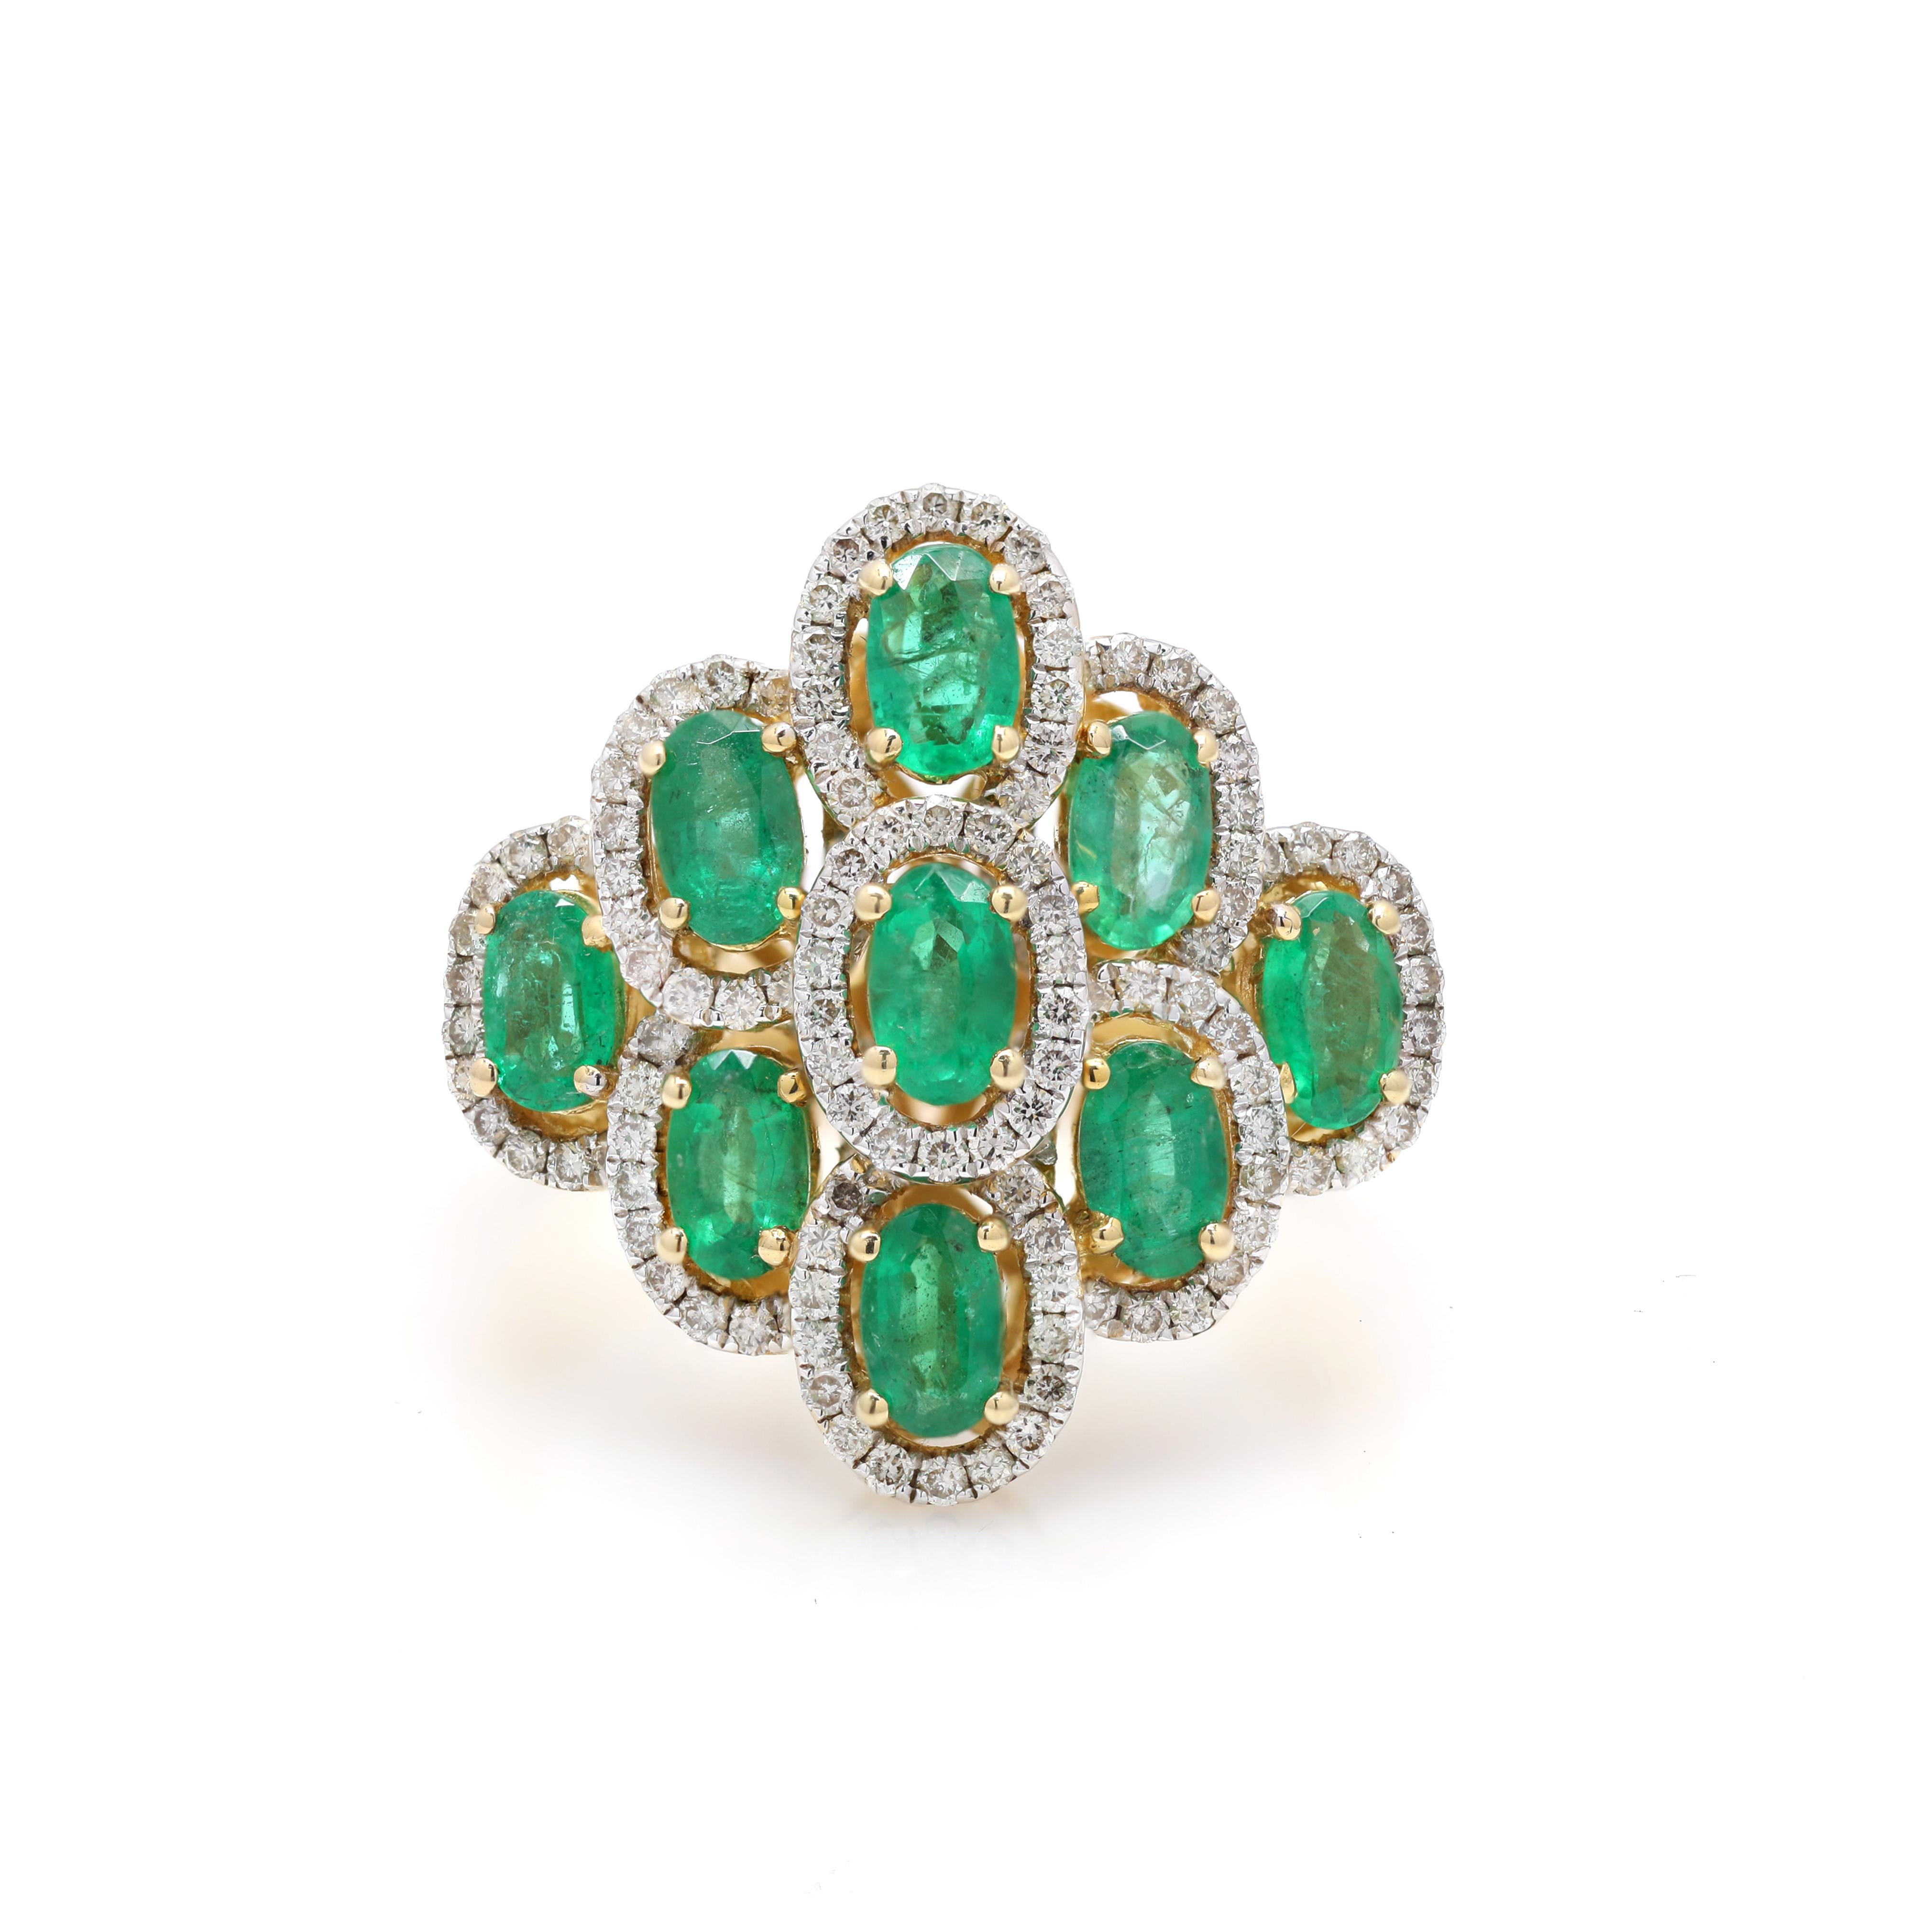 For Sale:  Estate 14k Yellow Gold 2.25 Carat Diamond Emerald Ring Cluster Cocktail Ring 3